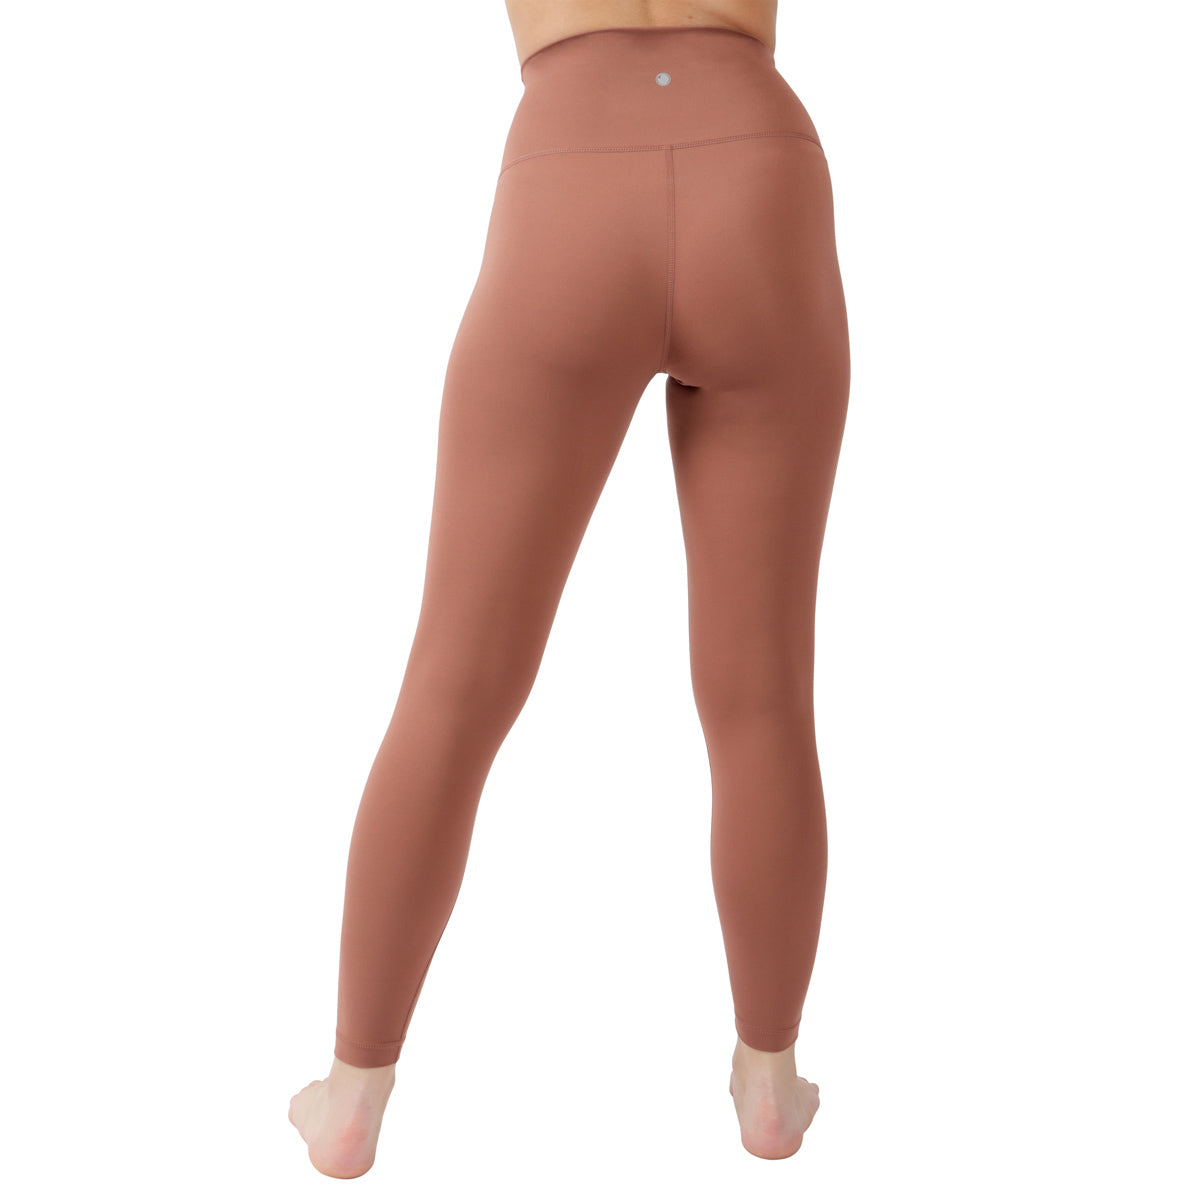 Yogalicious - Women's Lux Super High Rise Ankle Leggings With Elastic Free  Criss Cross Waistband - Copper Iron - X Large : Target